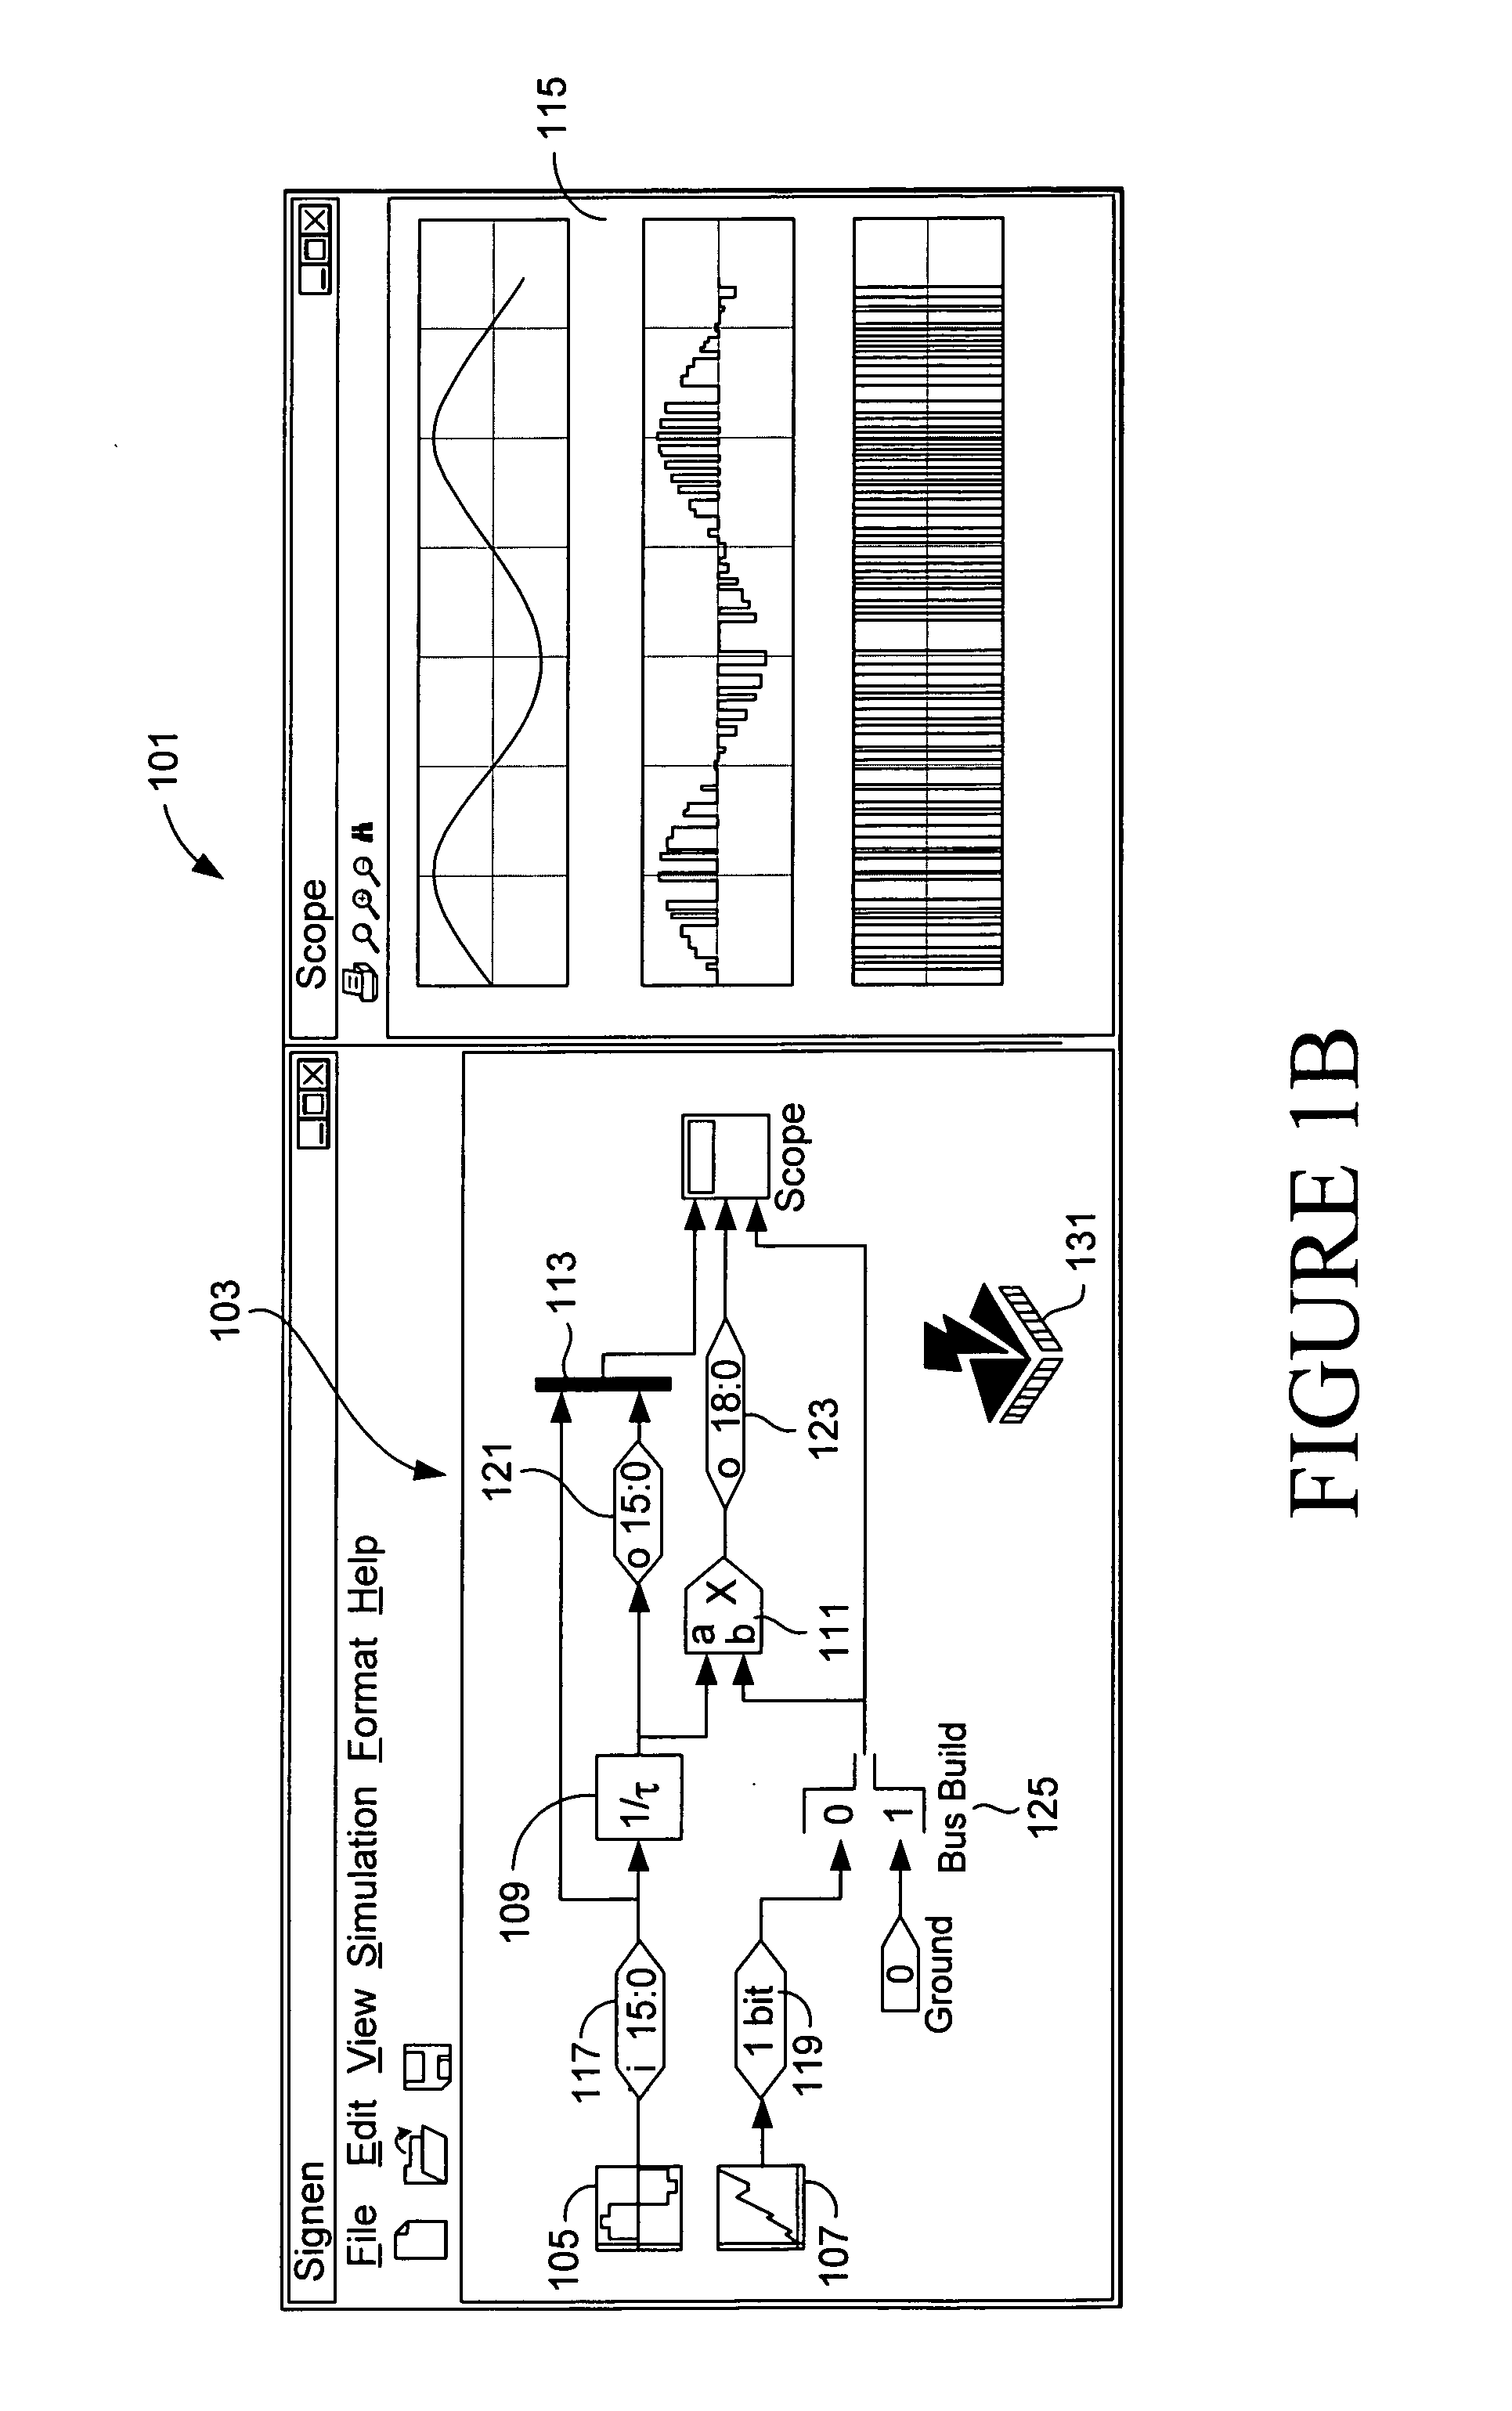 Embedded logic analyzer functionality for system level environments